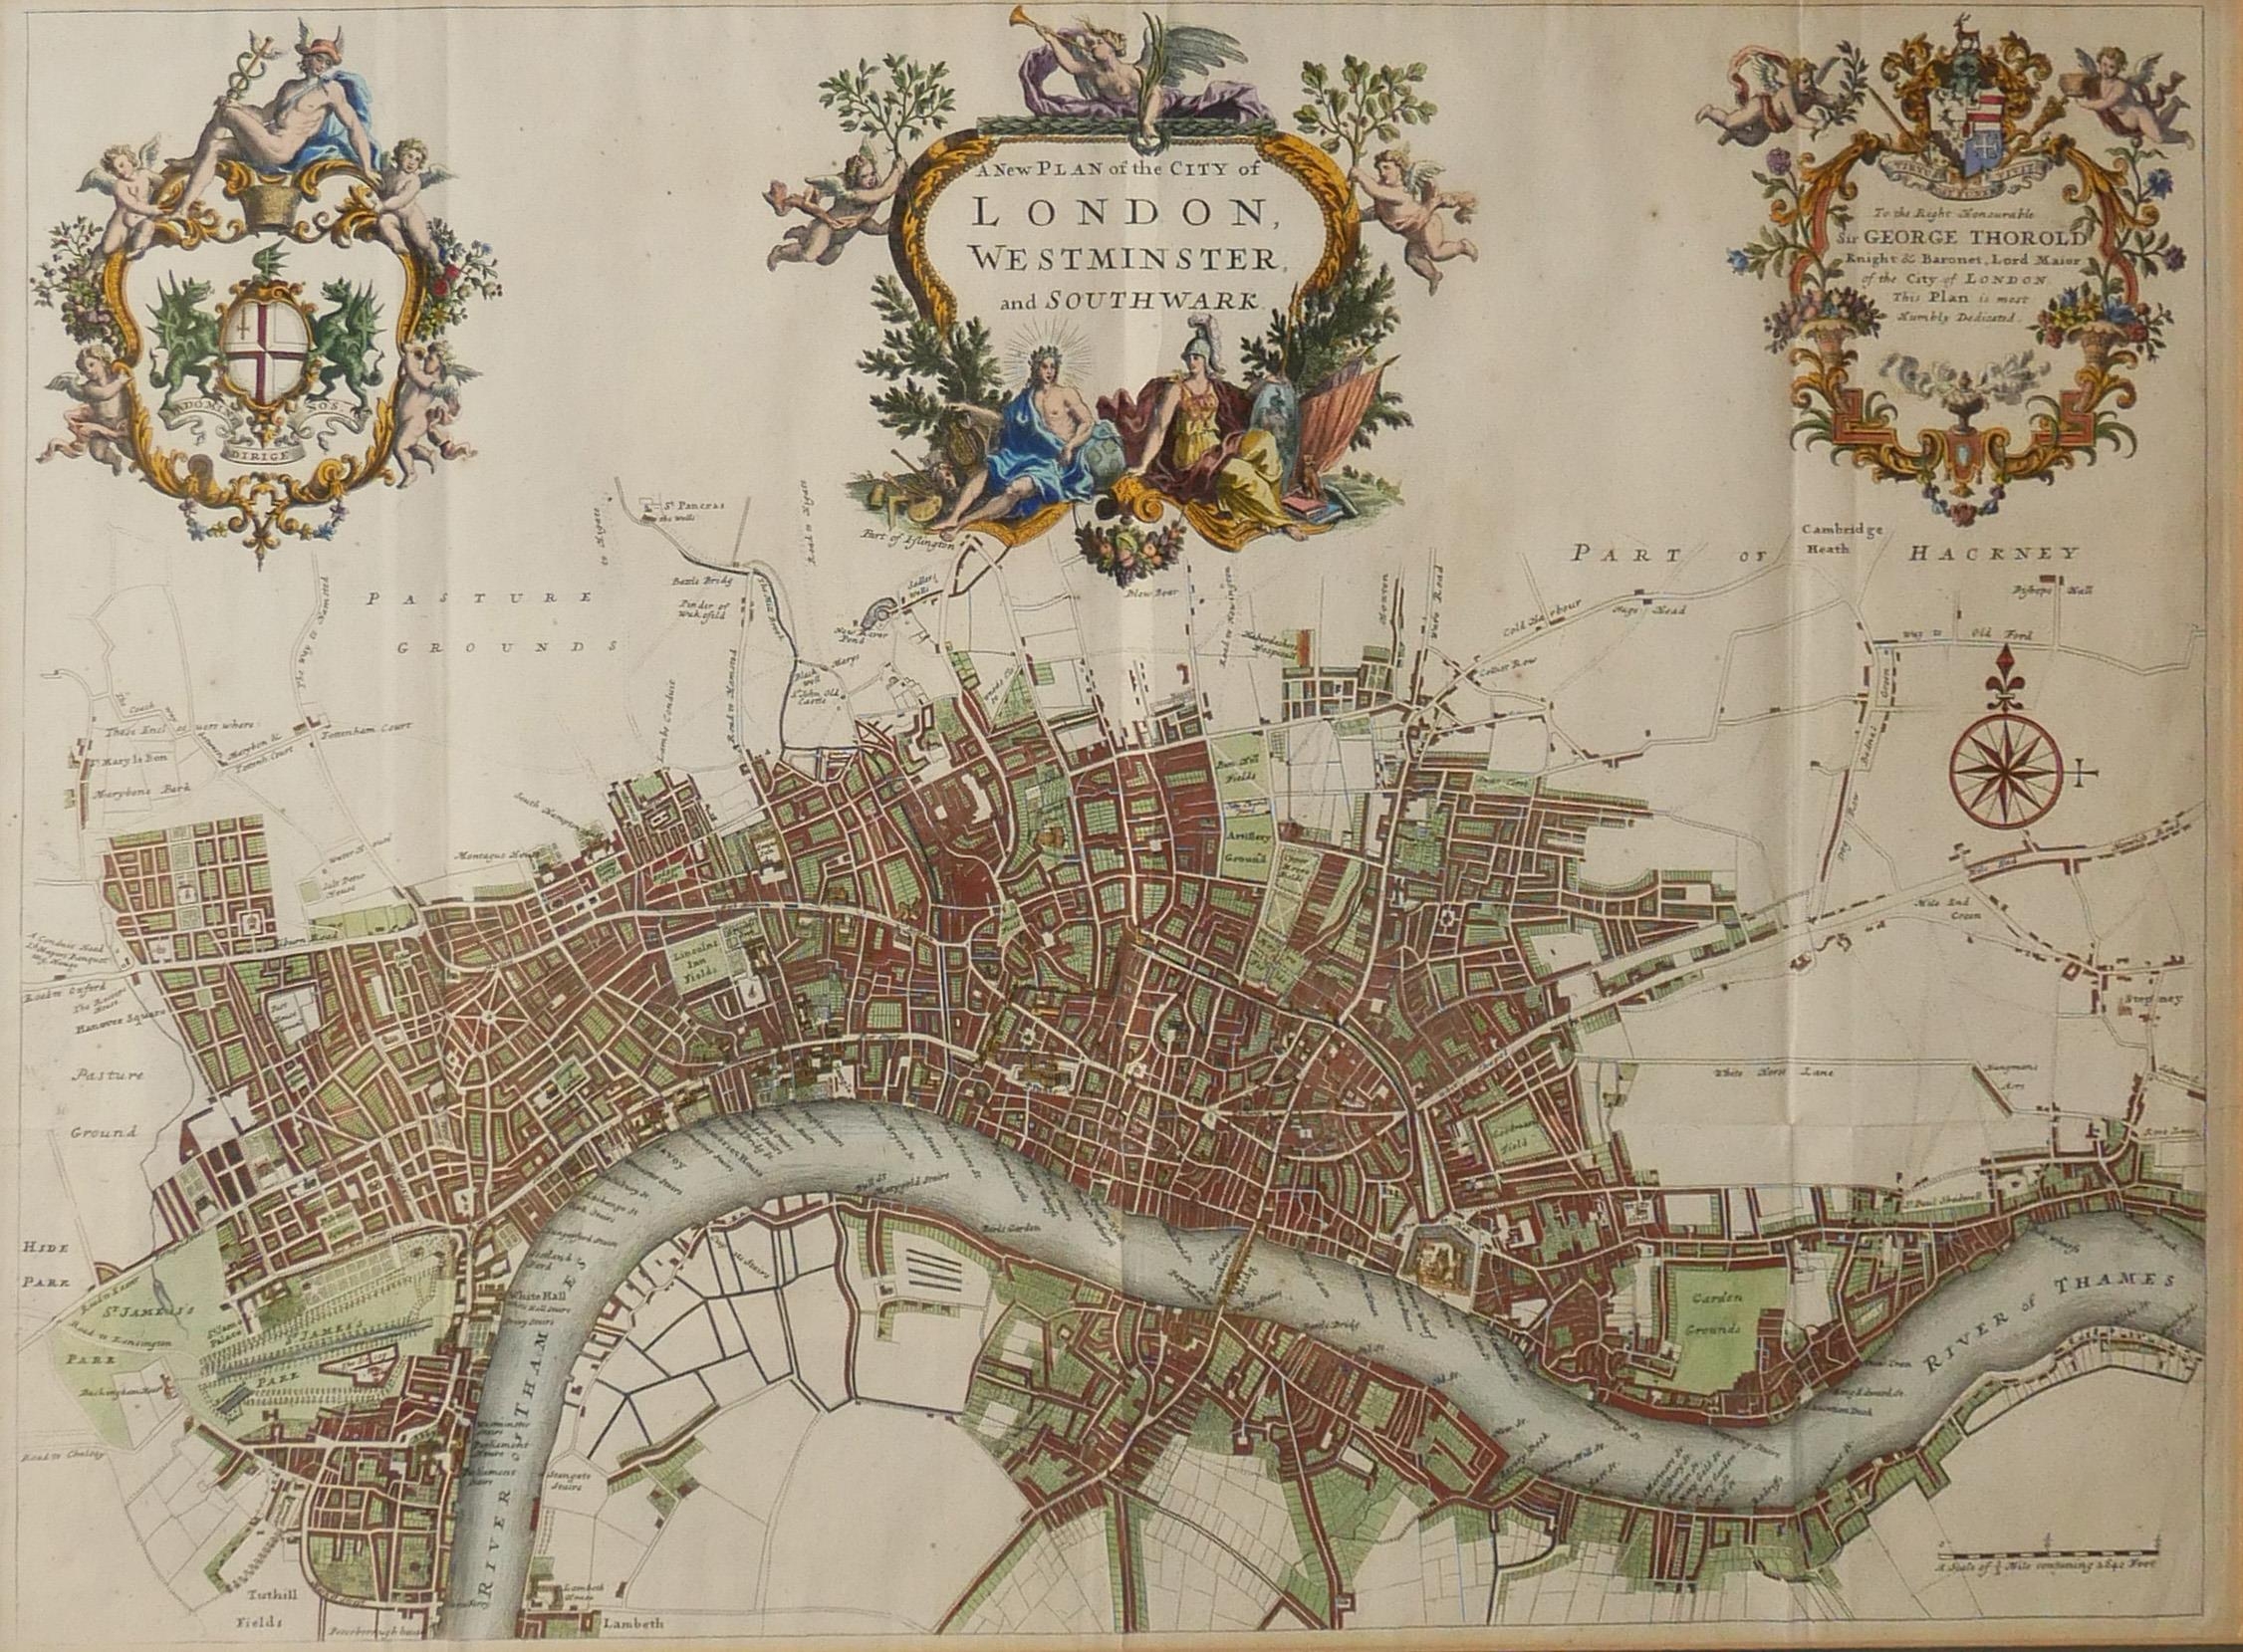 JOHN STRYPE, ENGLISH, 1643 - 1737, ENGRAVING A New Plan of the City of London, Westminster and